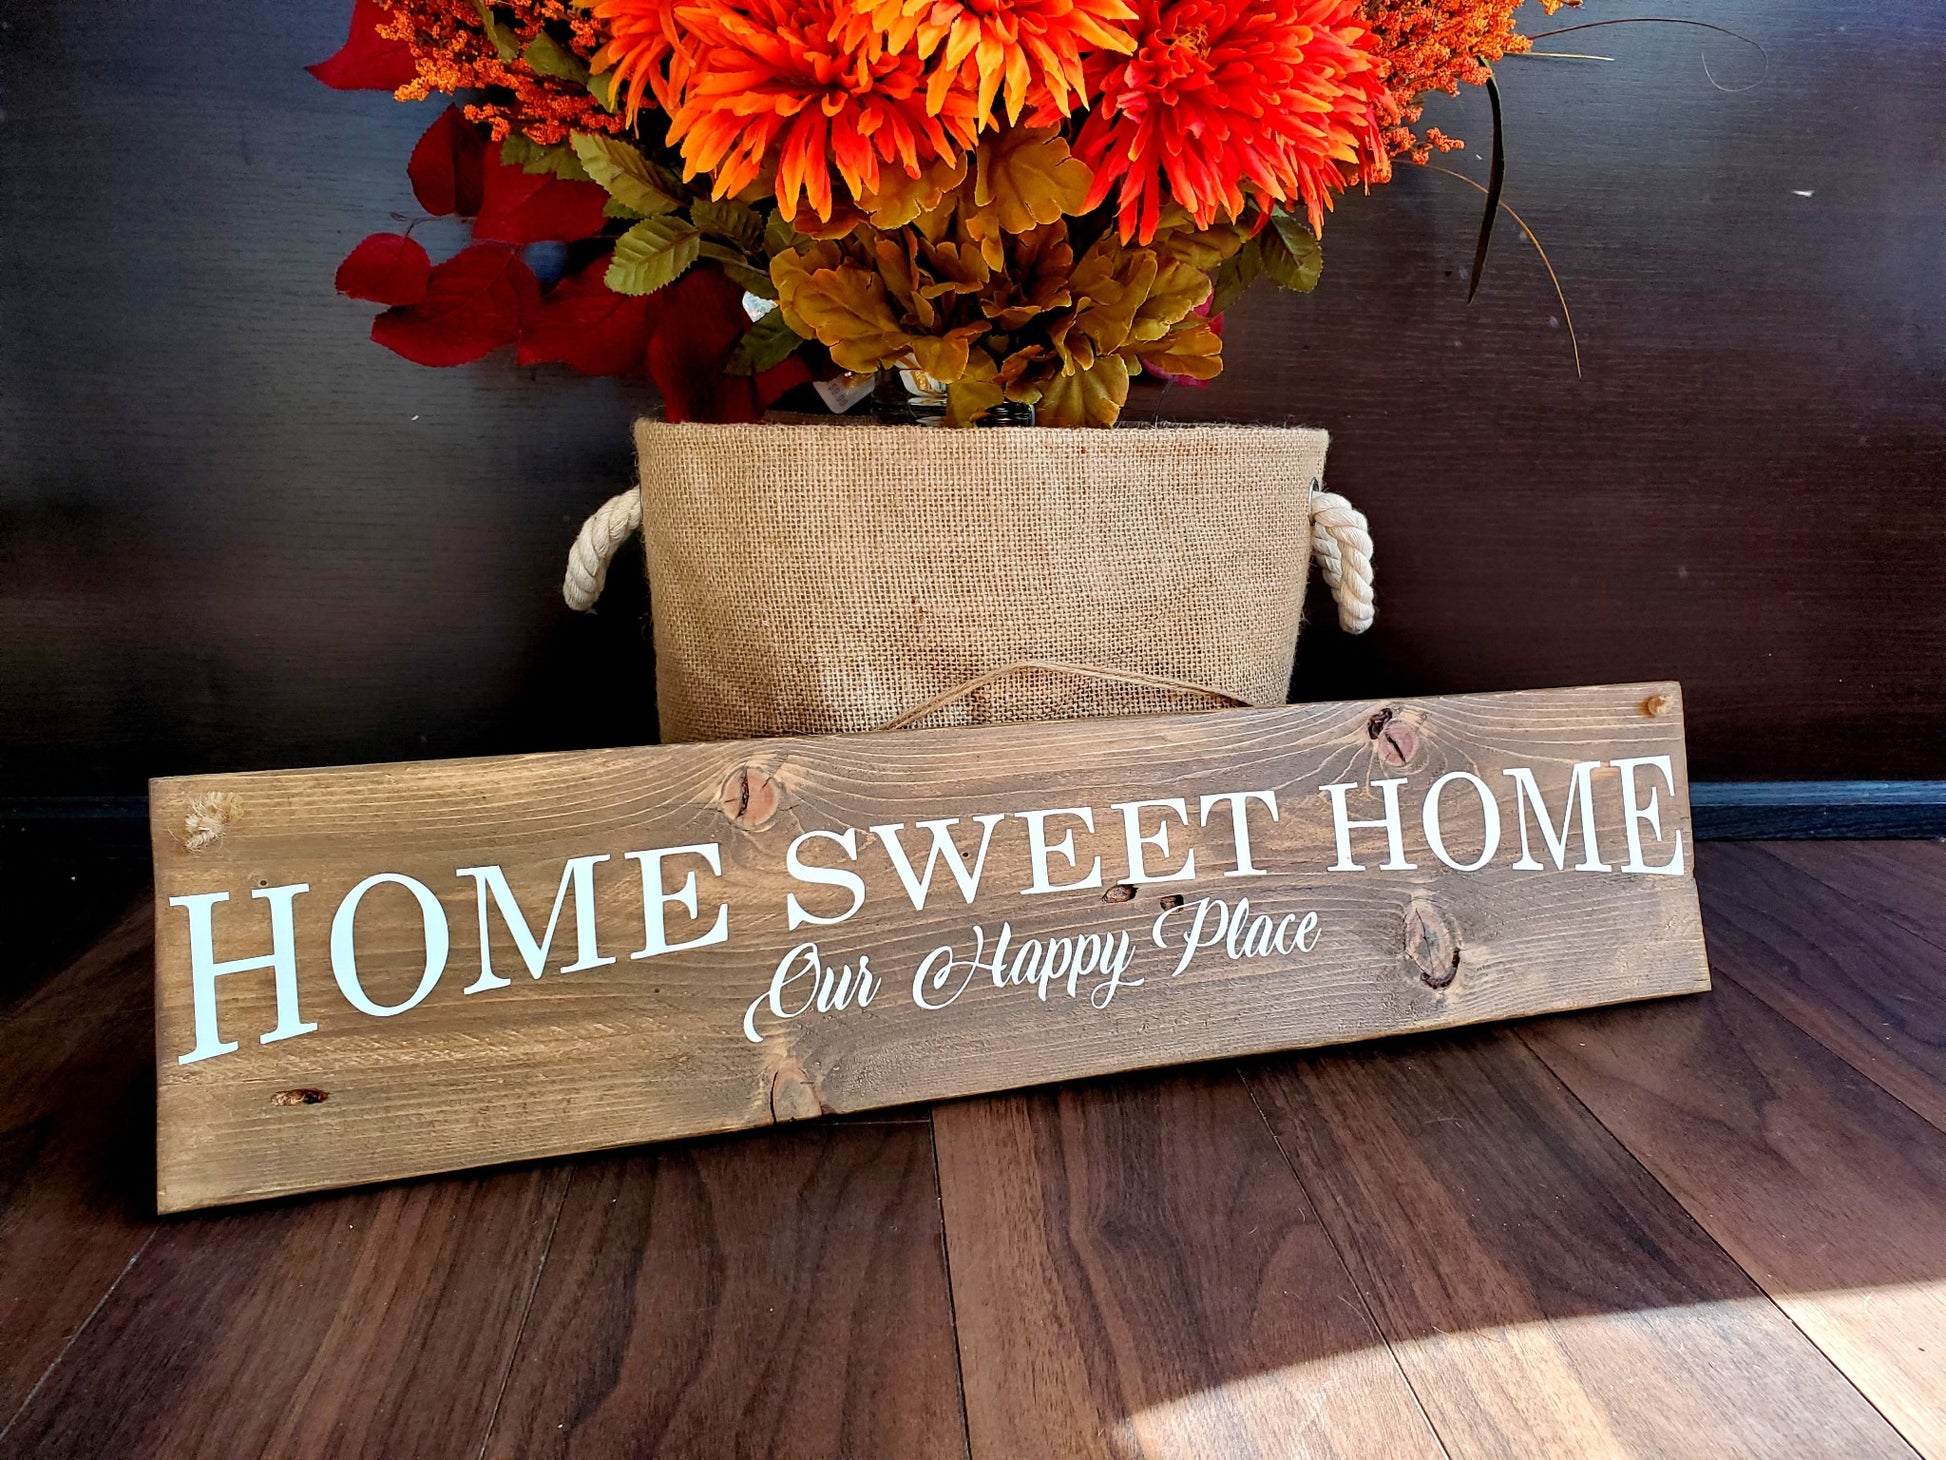 Home Sweet Home Wall Decor Sign - Rustic.